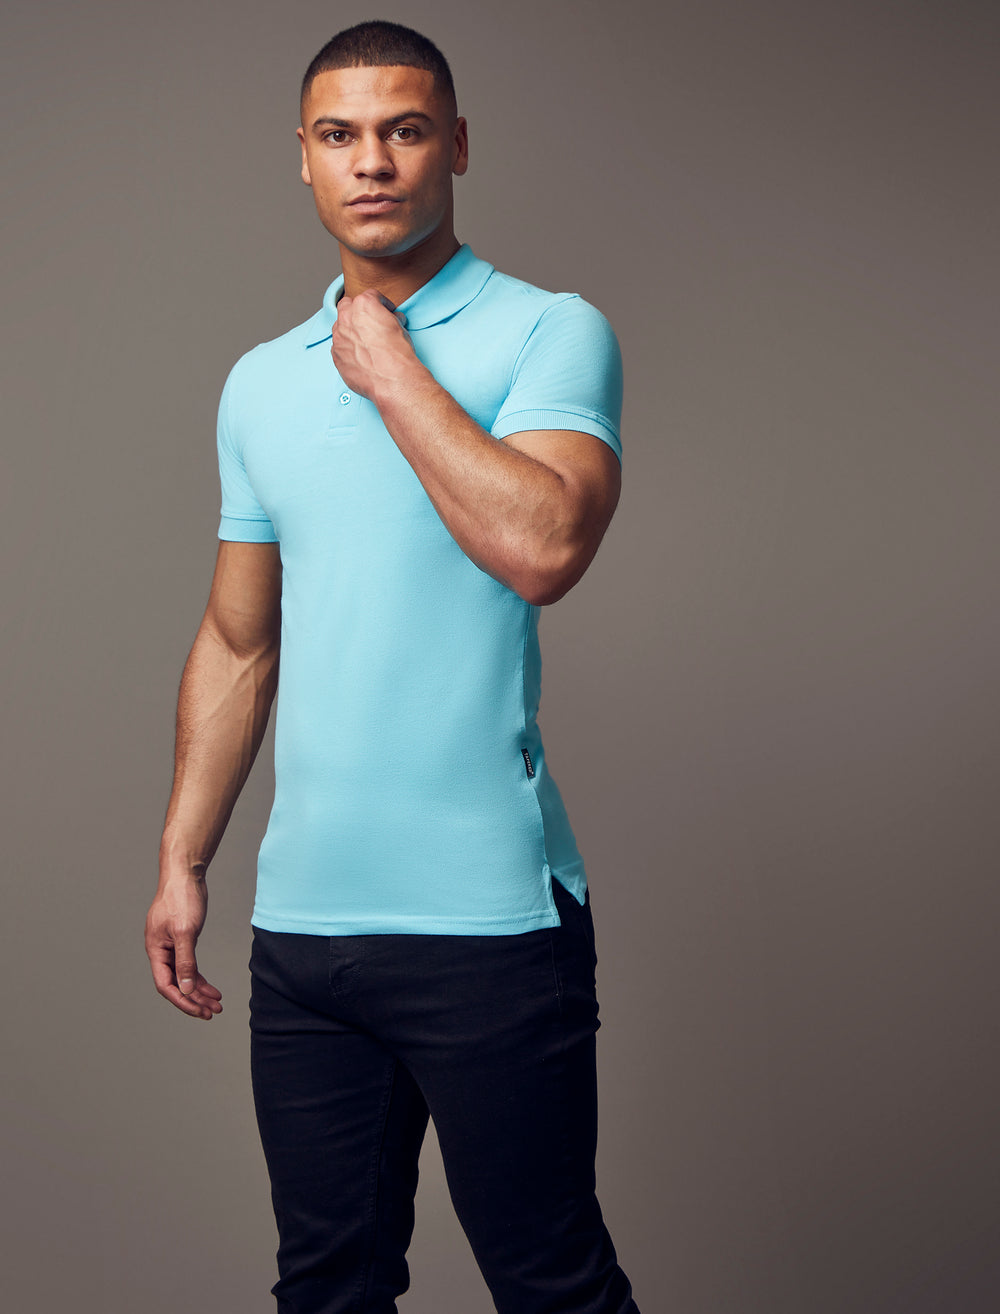 turquoise muscle fit short sleeve polo shirt, highlighting the tapered fit and premium quality offered by Tapered Menswear